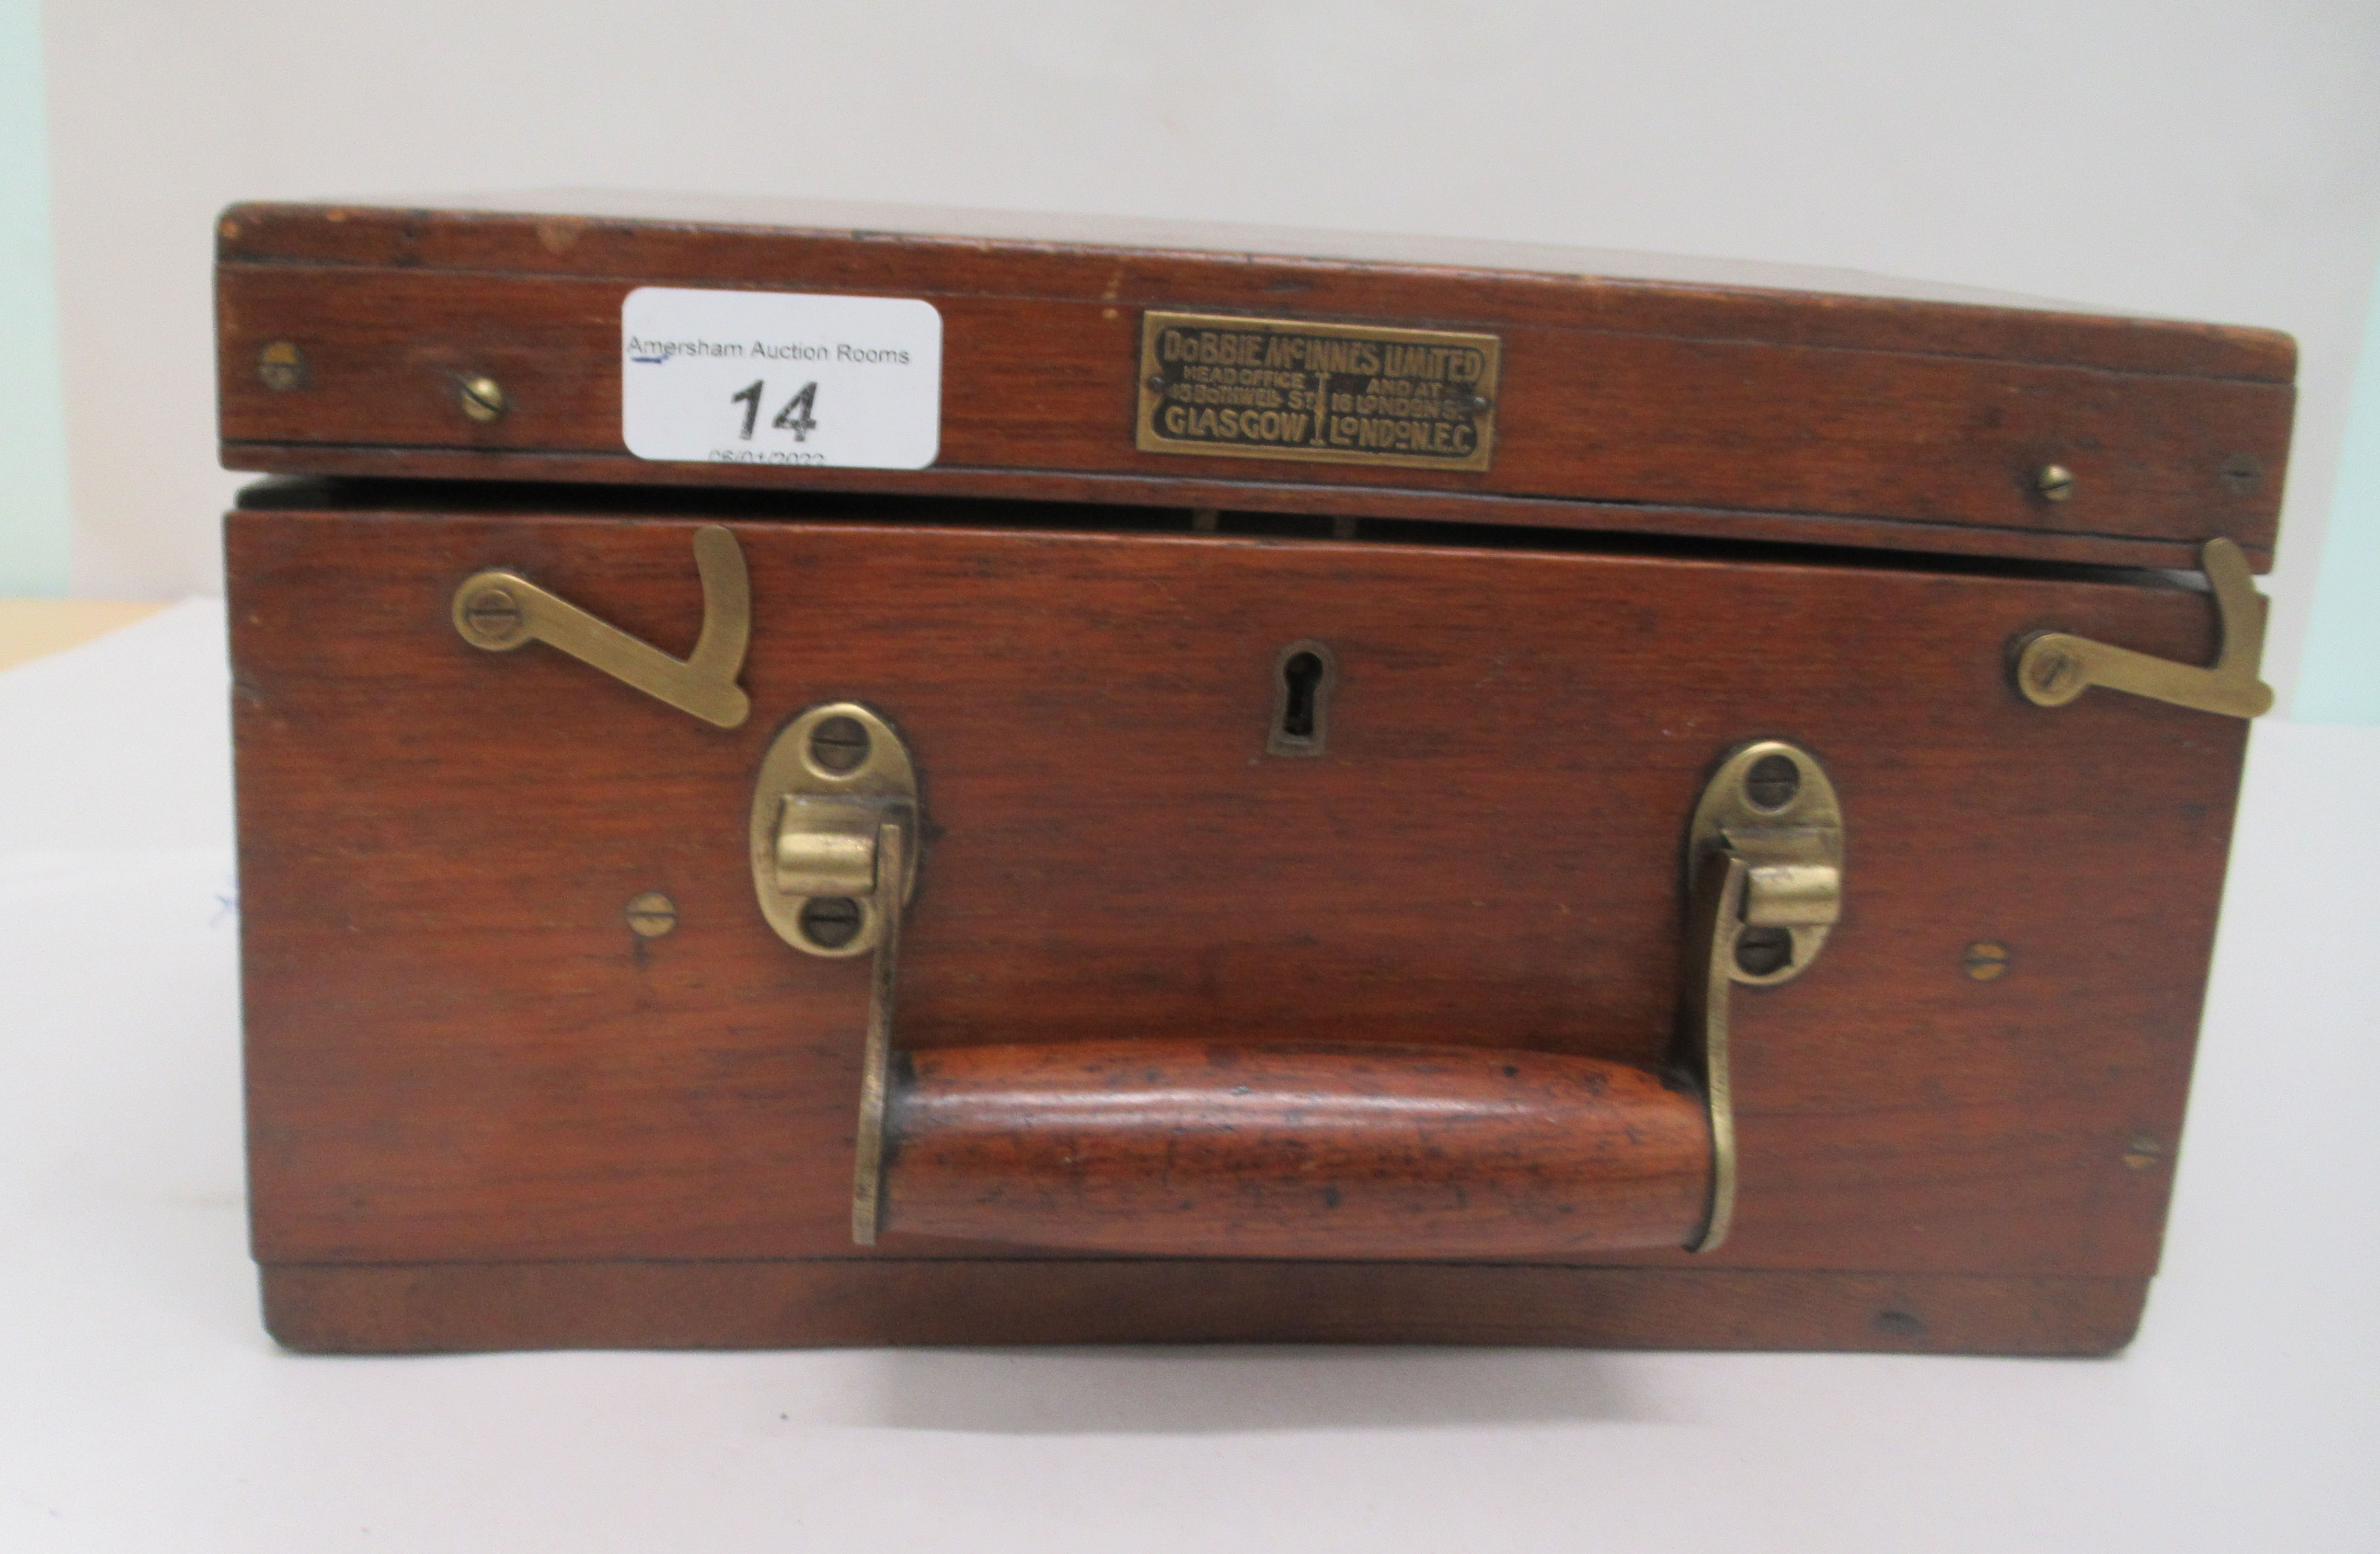 The McInnes-Dobbie patent steam engine indicator, in a mahogany carrying case - Image 7 of 7